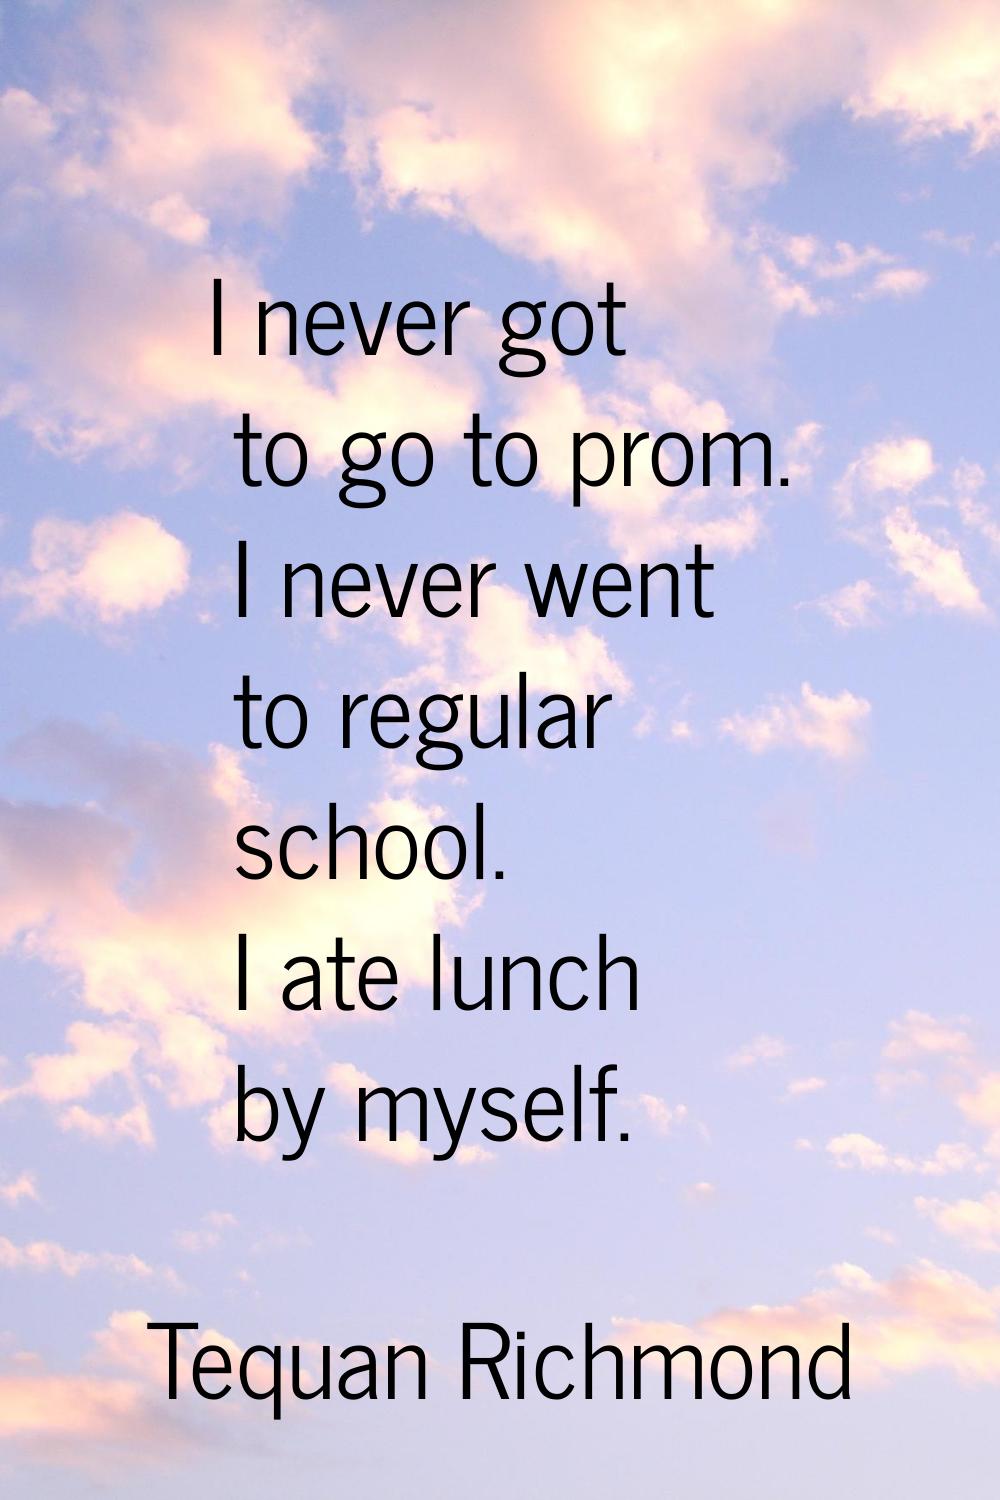 I never got to go to prom. I never went to regular school. I ate lunch by myself.